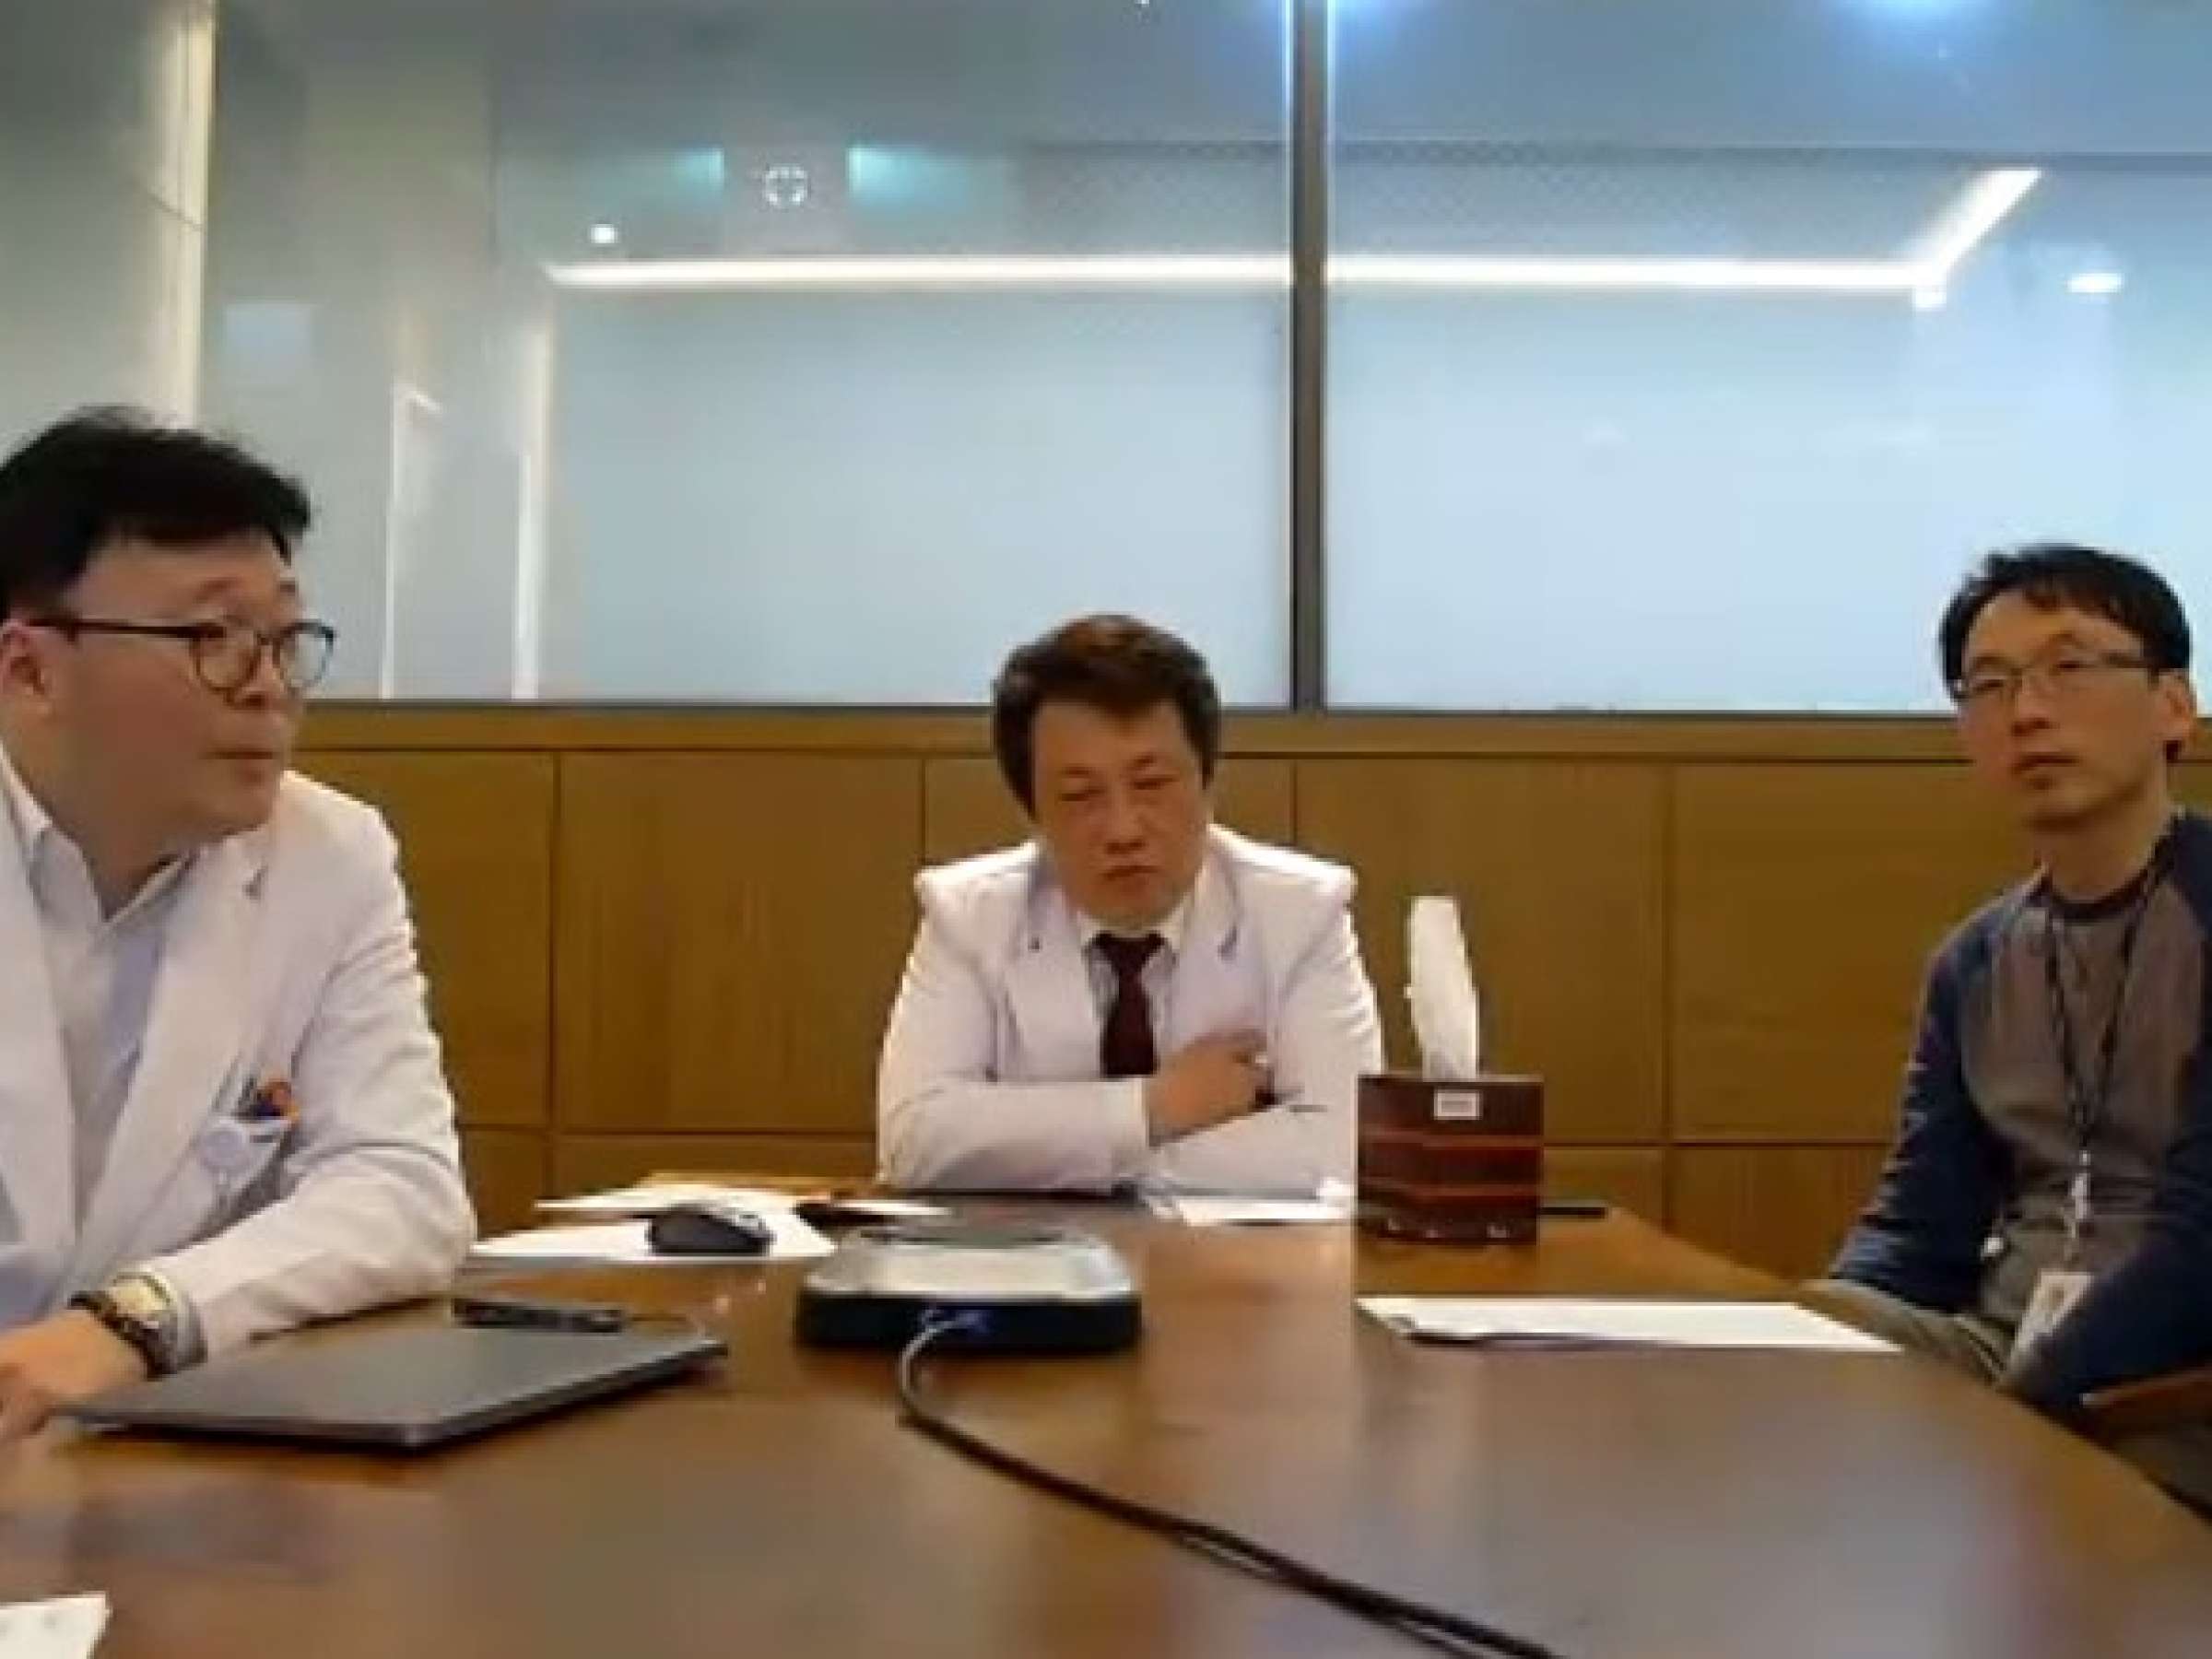 Dr. Wang-Jun Lee and colleagues at today's webinar on COVID-19